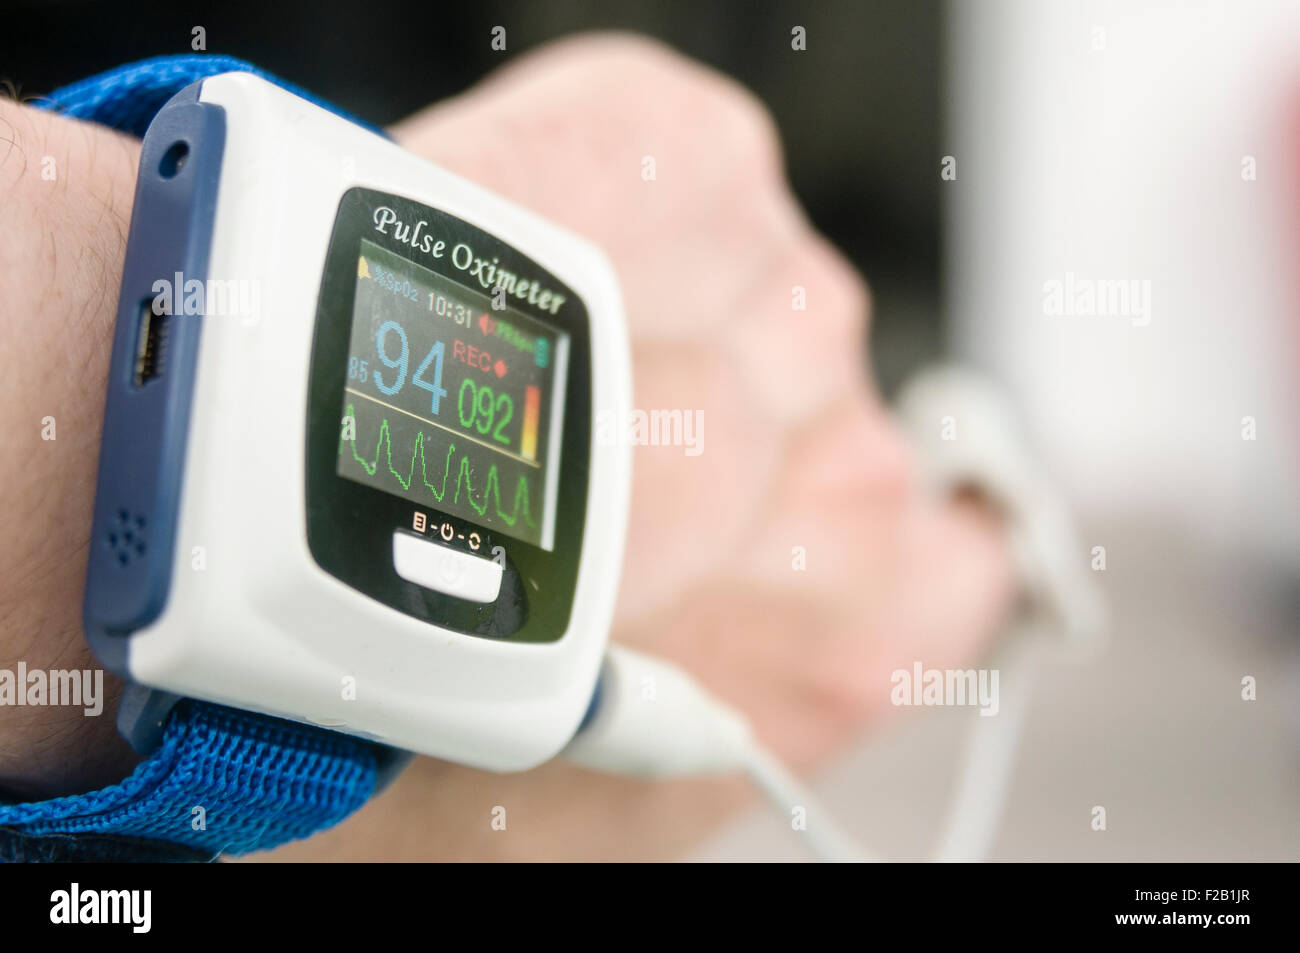 Pulse oximeter being worn by a male patient to measure his blood oxygen saturation level Stock Photo